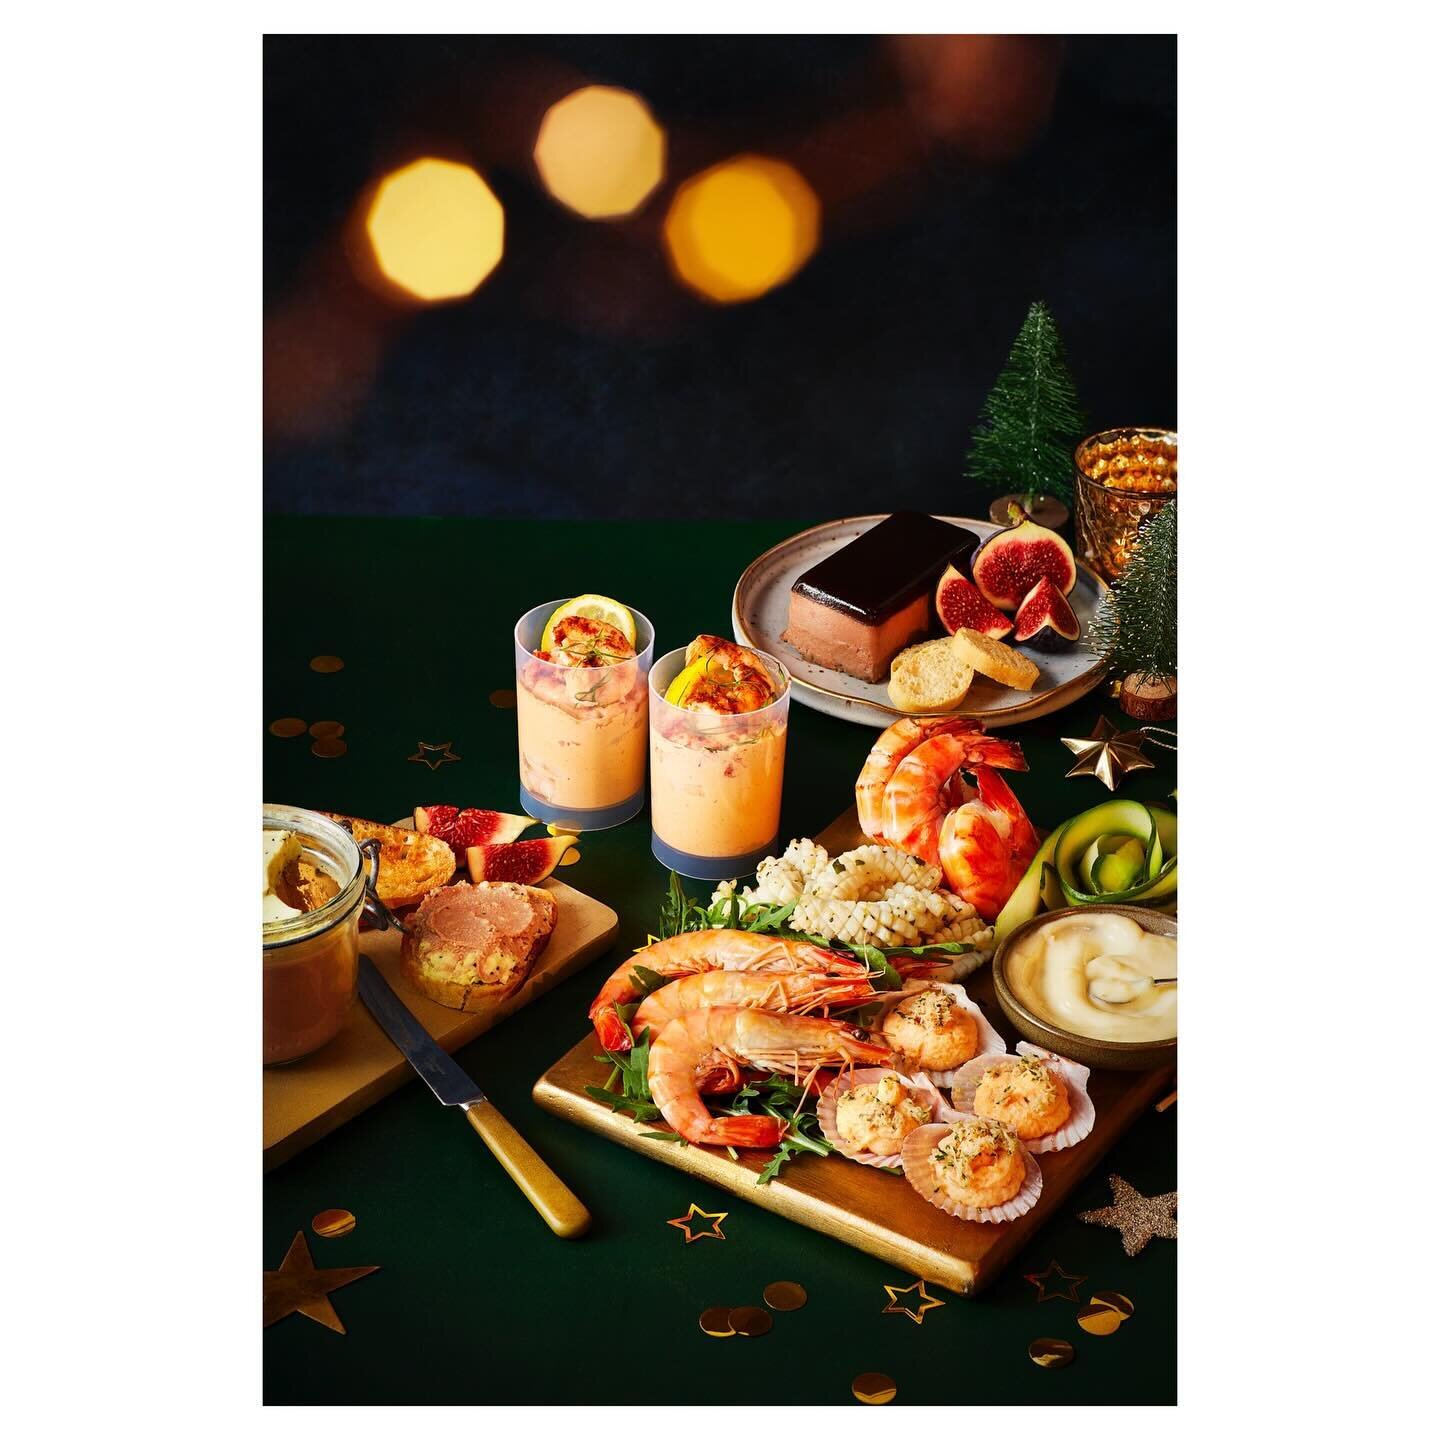 CHRISTMASSSSSSSSSSSS 🎄this time fishy canap&eacute;s and nut roast for @asda @ourmedialtd with the lovely @sebirks creative direction and @melissarjphoto photography 📸 Other photos in this spread by @mylesnewphotography #foodstyling #foodphotograph